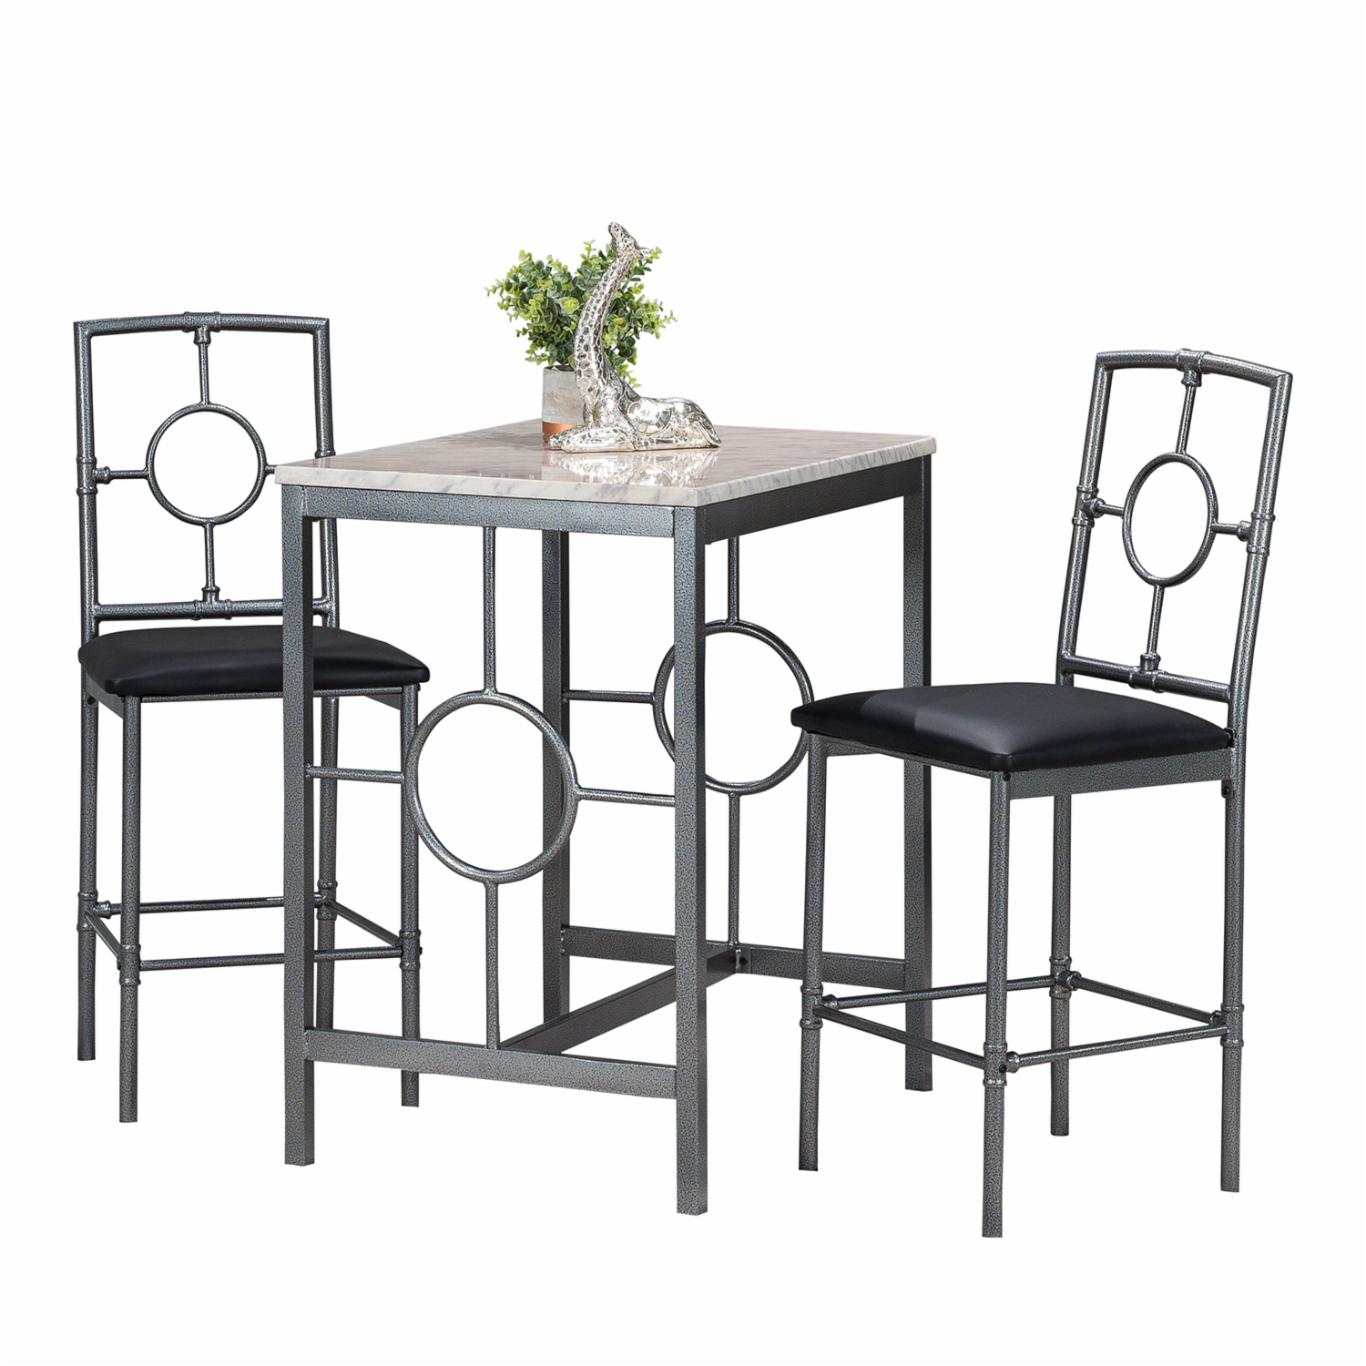 Bar Table Set: 3 Piece Counter Height Pub Table Set